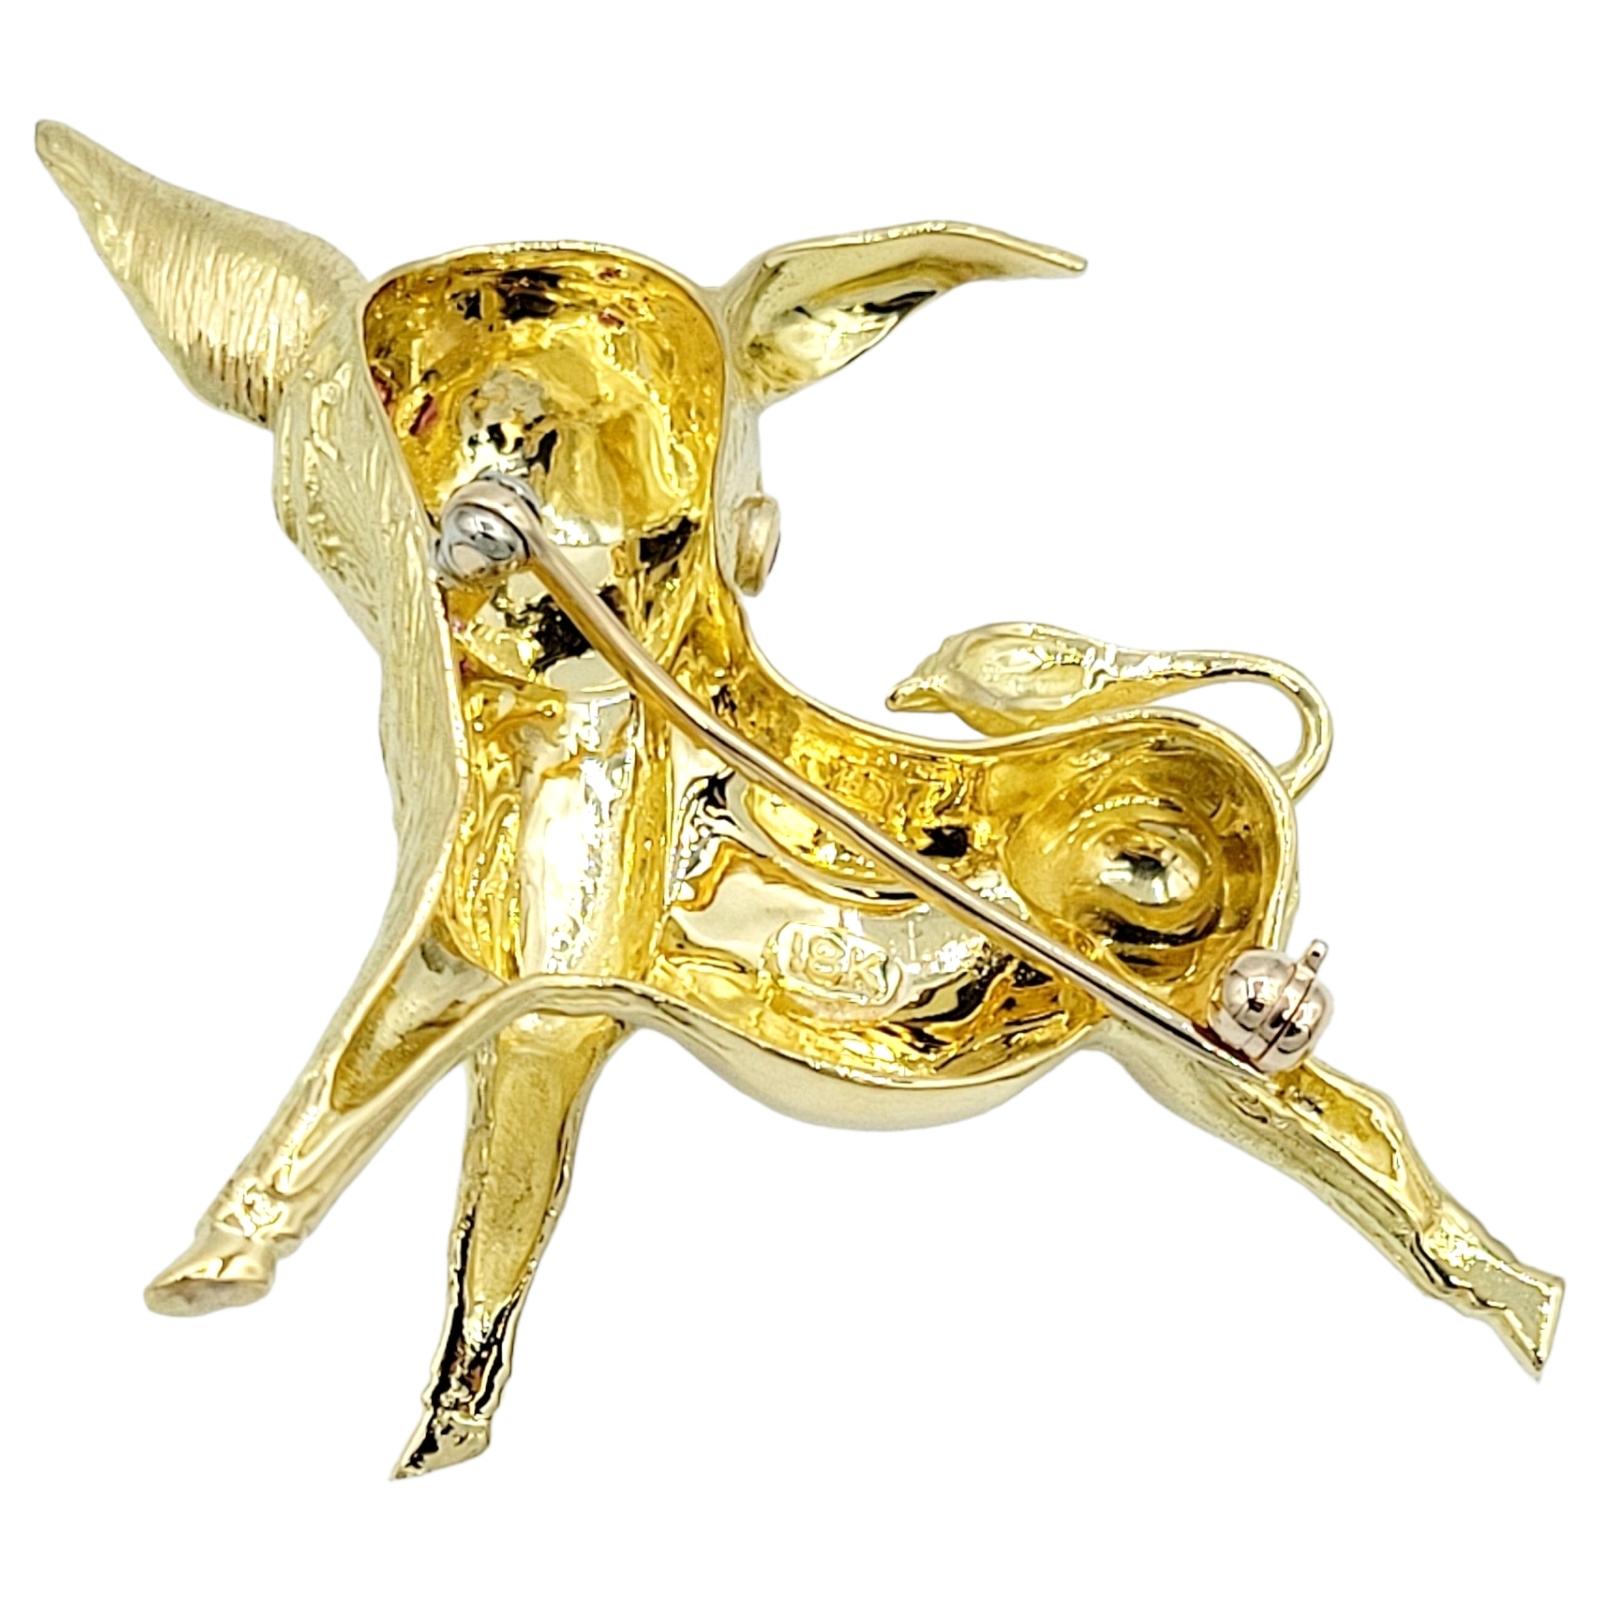 Dancing Burro / Donkey Brooch with Ruby Eyes in 18 Karat Yellow Gold In Good Condition For Sale In Scottsdale, AZ